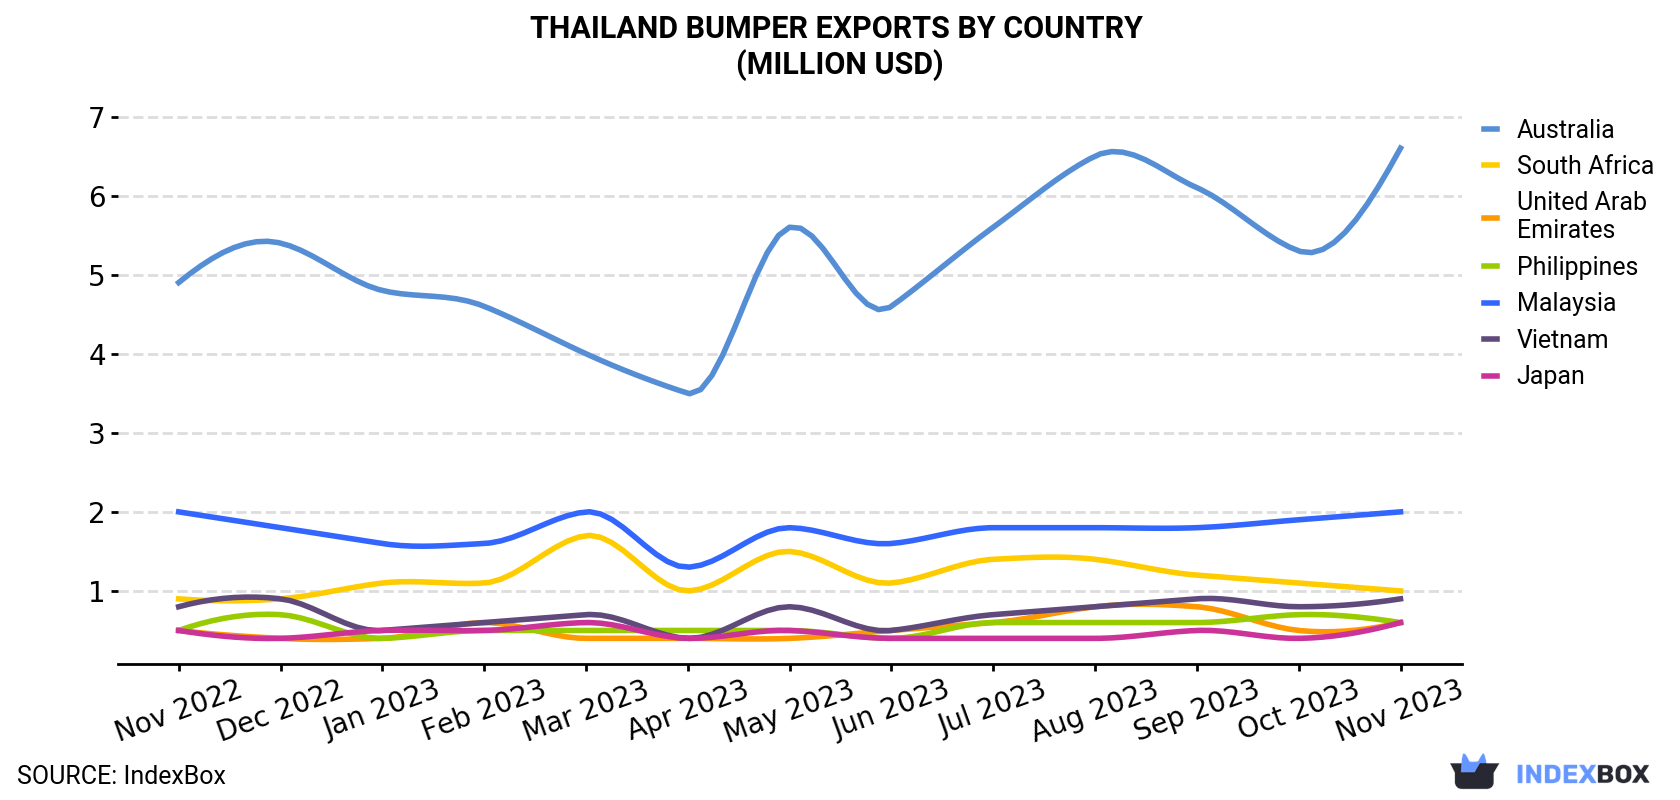 Thailand Bumper Exports By Country (Million USD)